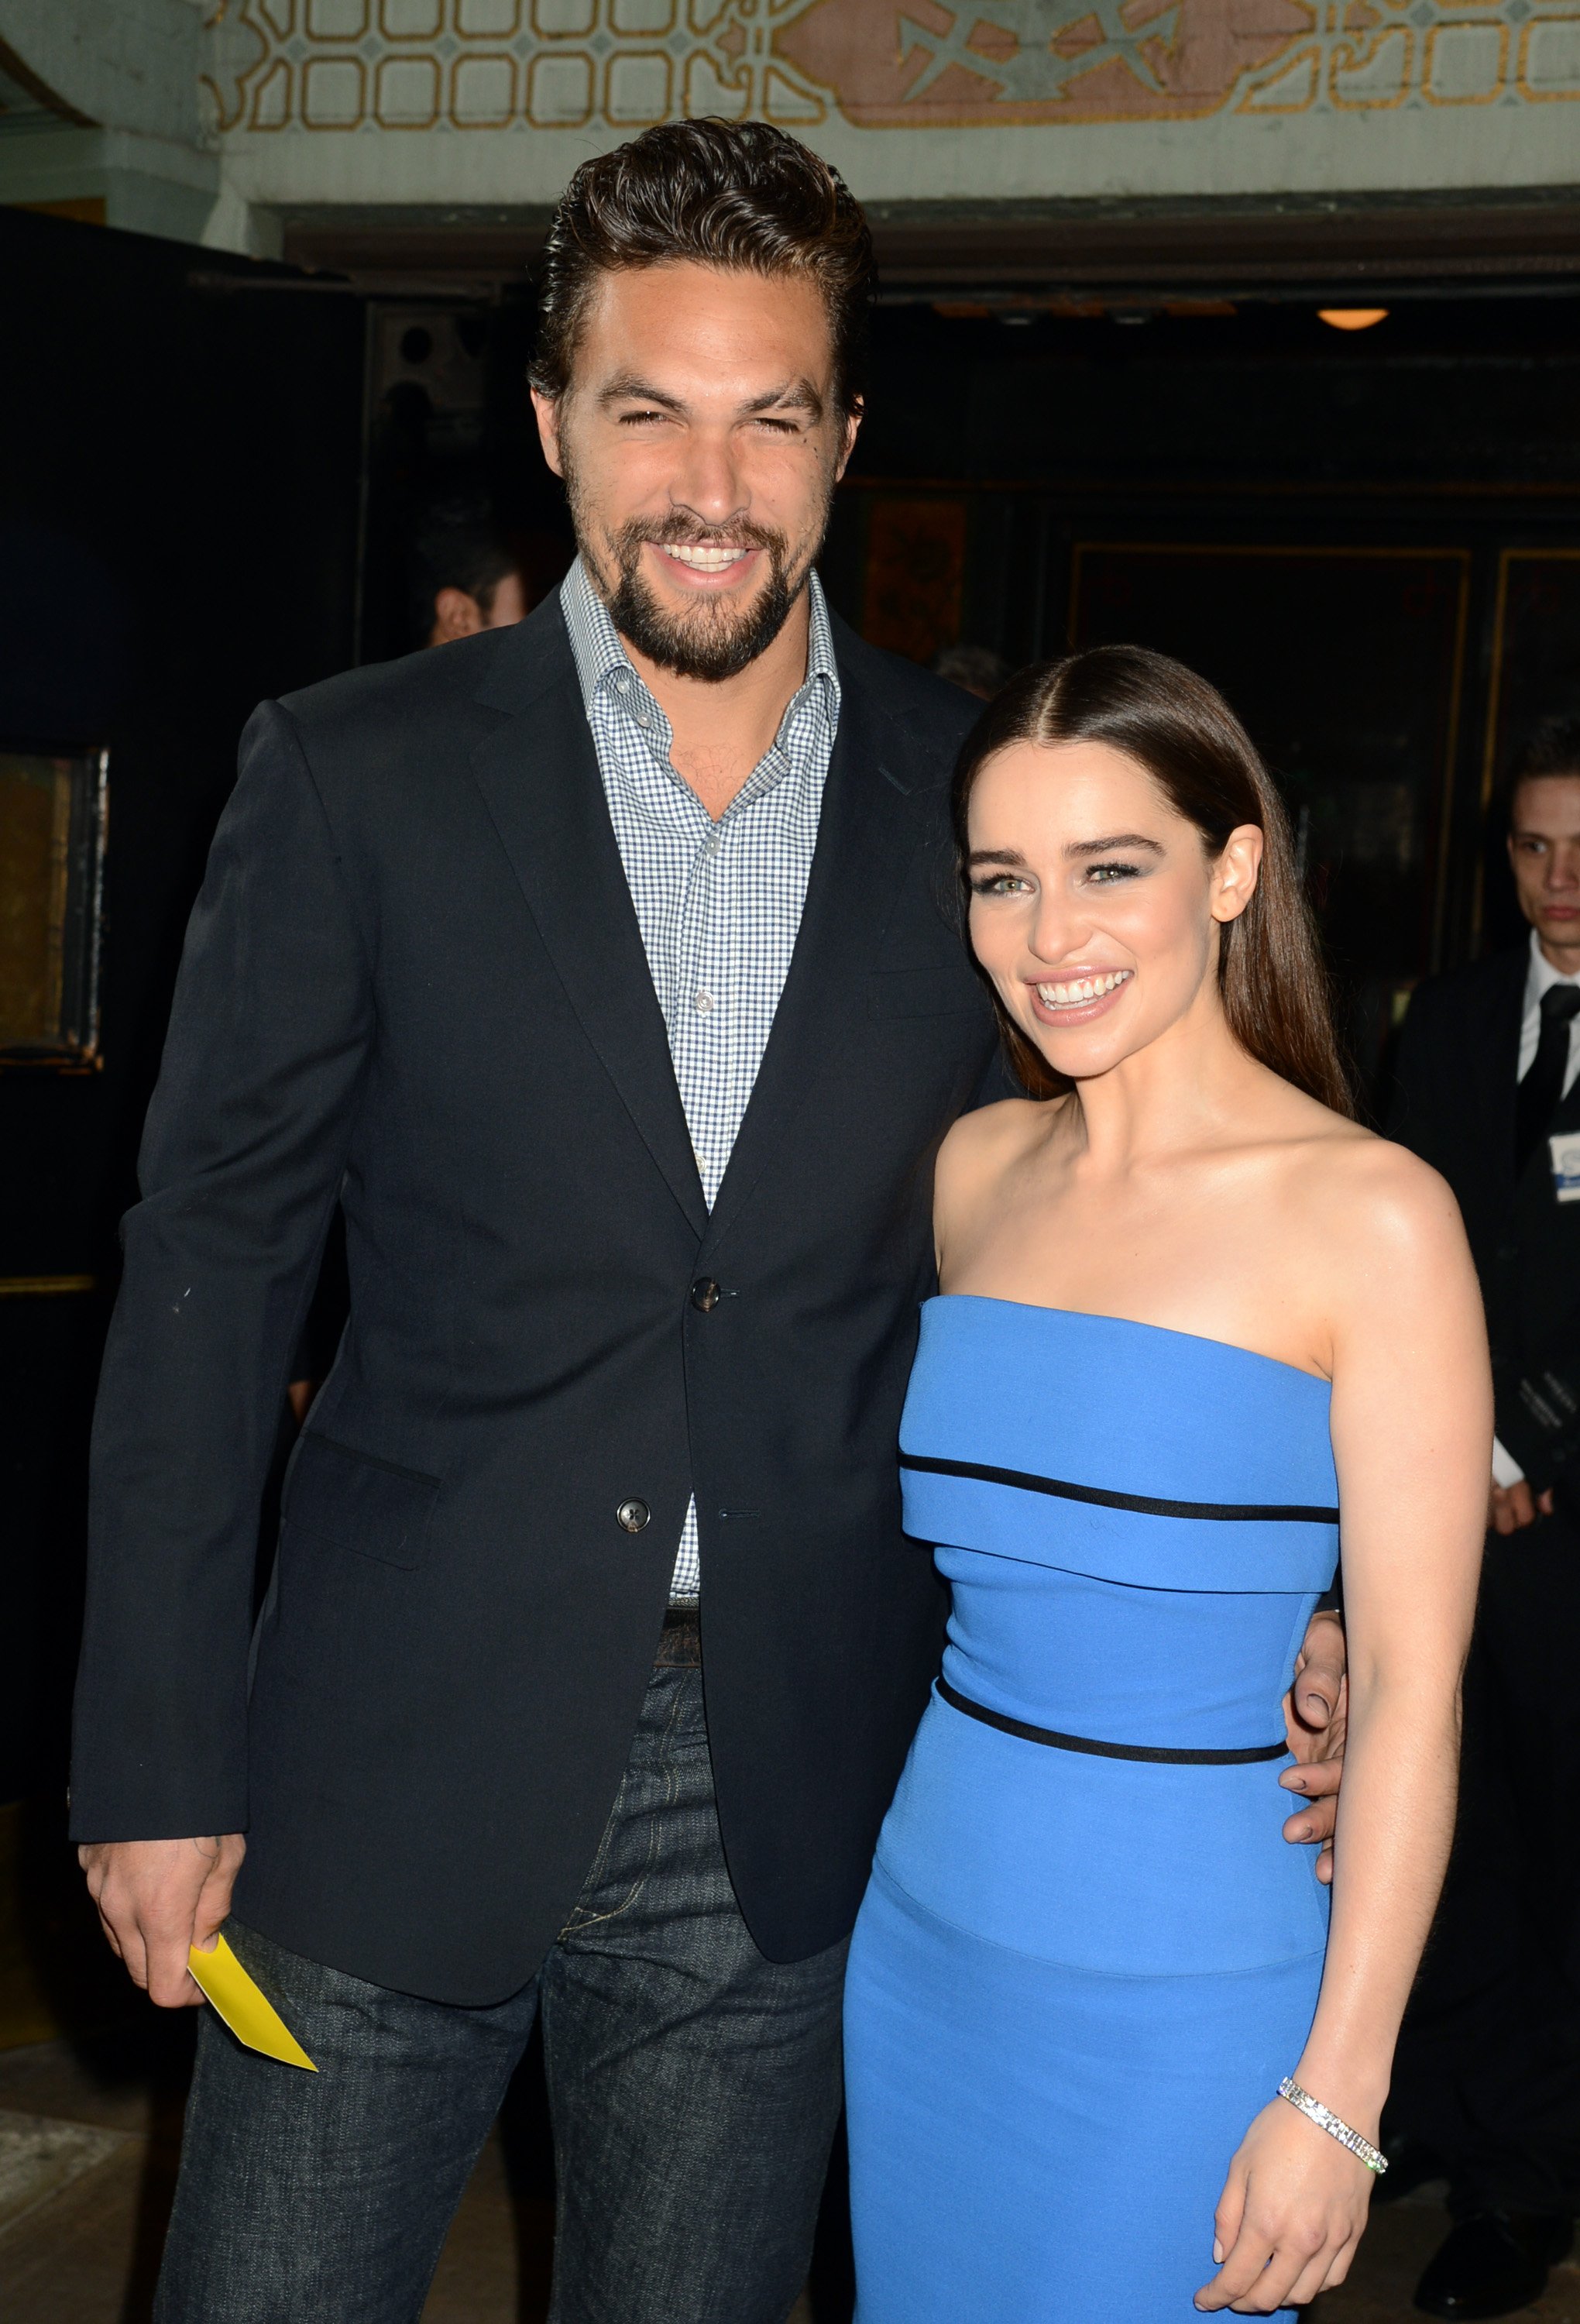 Jason Momoa and Emilia Clarke attend the HBO's "Game Of Thrones" Los Angeles Premiere at TCL Chinese Theatre on March 18, 2013 in Hollywood, California. | Source: Getty Images